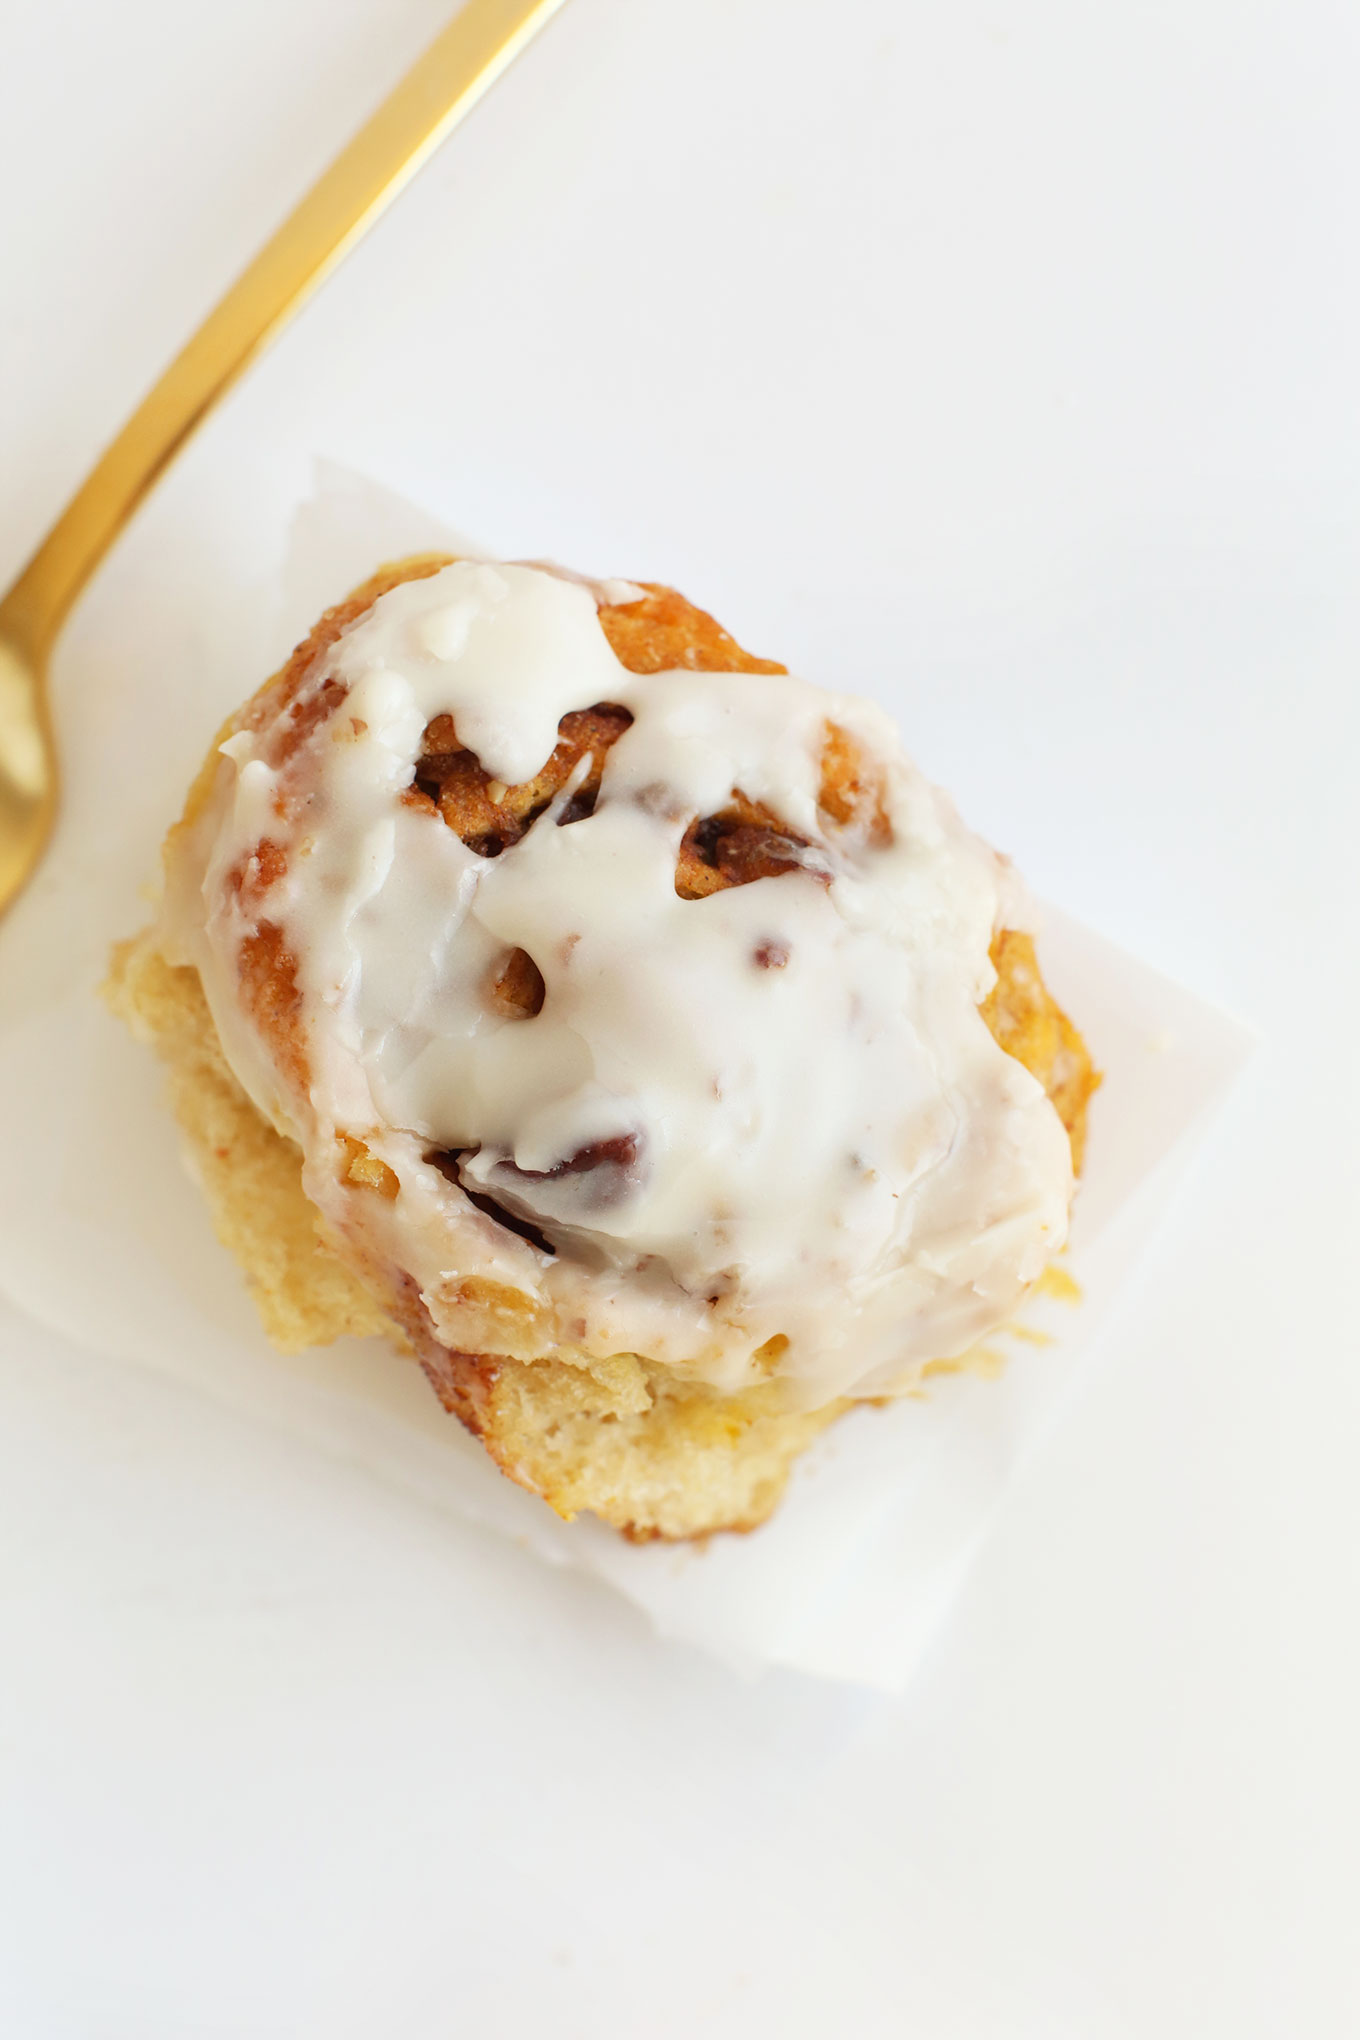 Overhead shot of a delicious and simple homemade Pumpkin Cinnamon Roll with icing